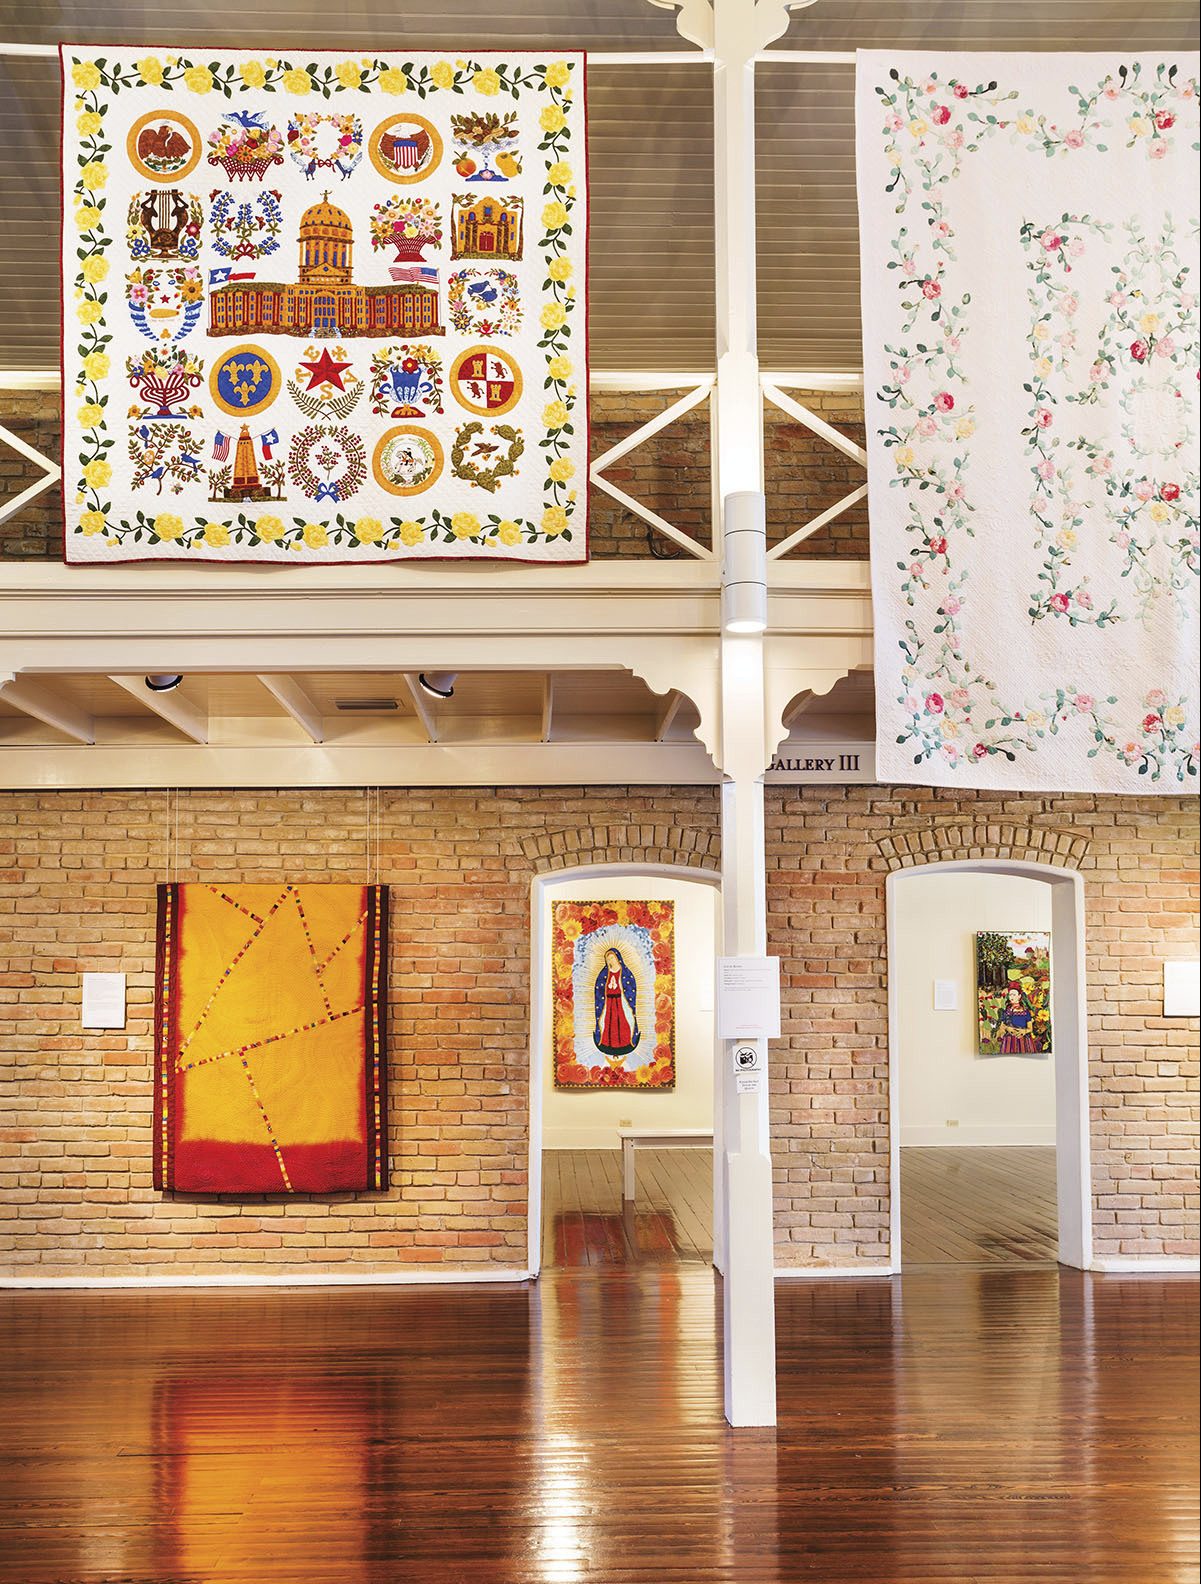 Quilts hang across the inside of the Texas Quilt Museum